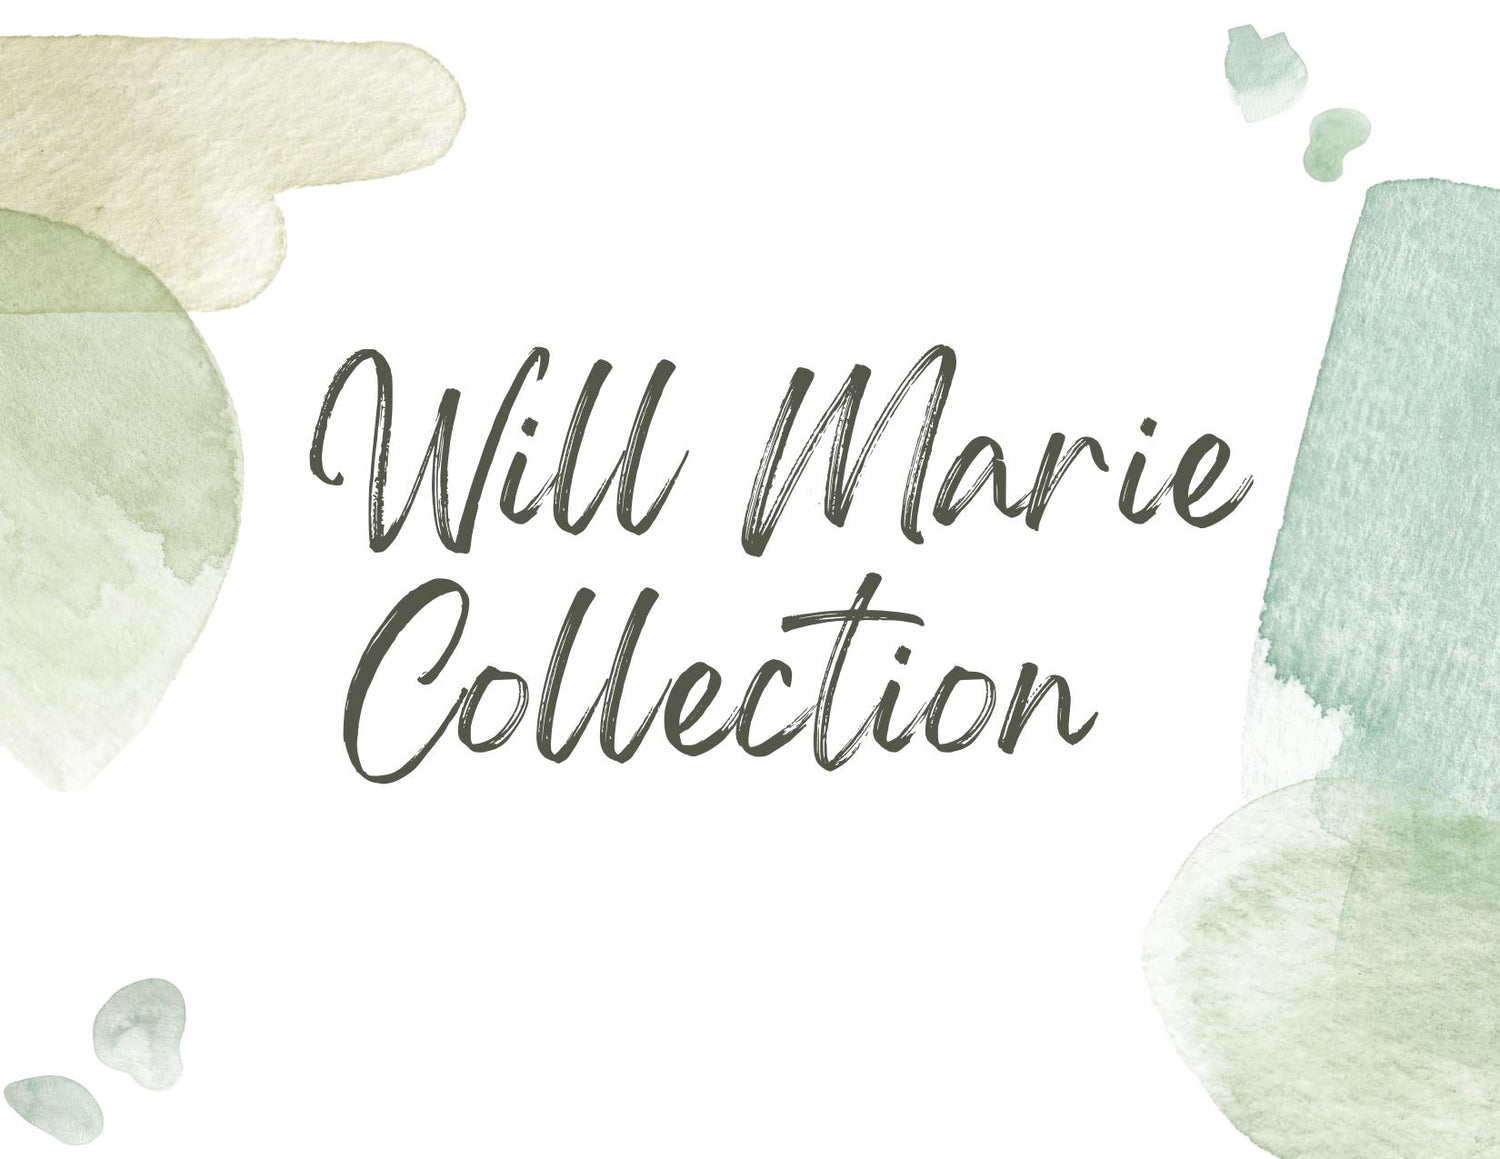 Will Marie Collection